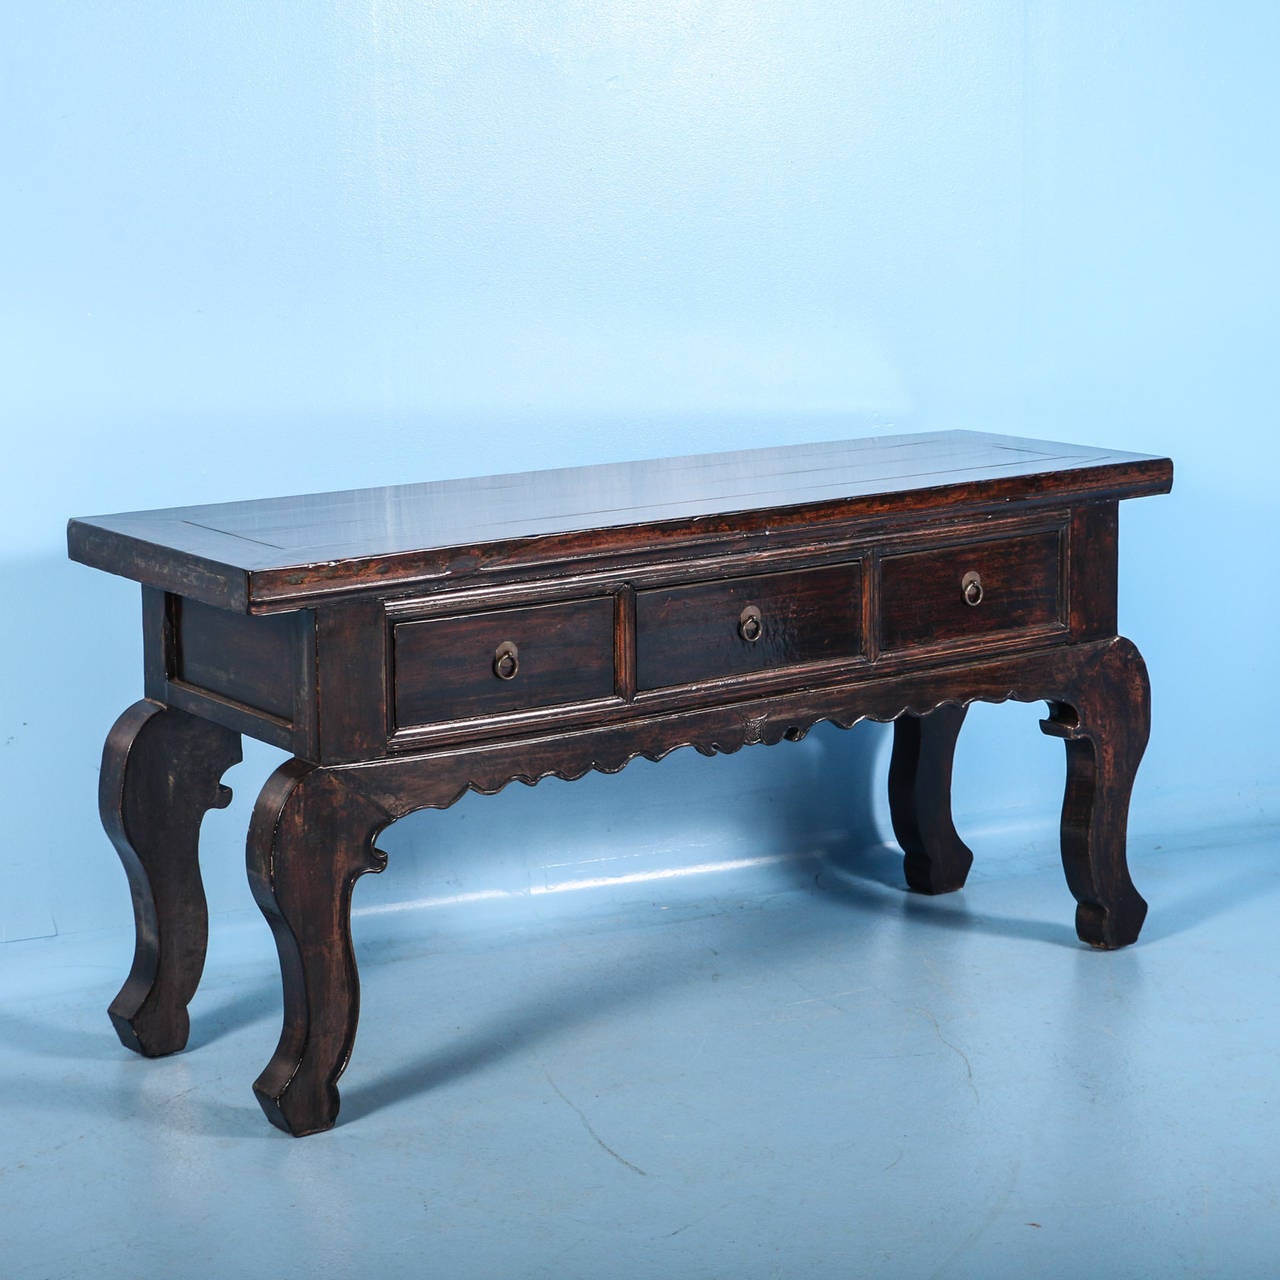 Chinese Console Table or Alter Table from Jiangsu Province of China. The dramatic curve of the legs and rich coloring of the wood are the elements that first strike one who sees this console in person. It has three wide opening drawers, hand carved